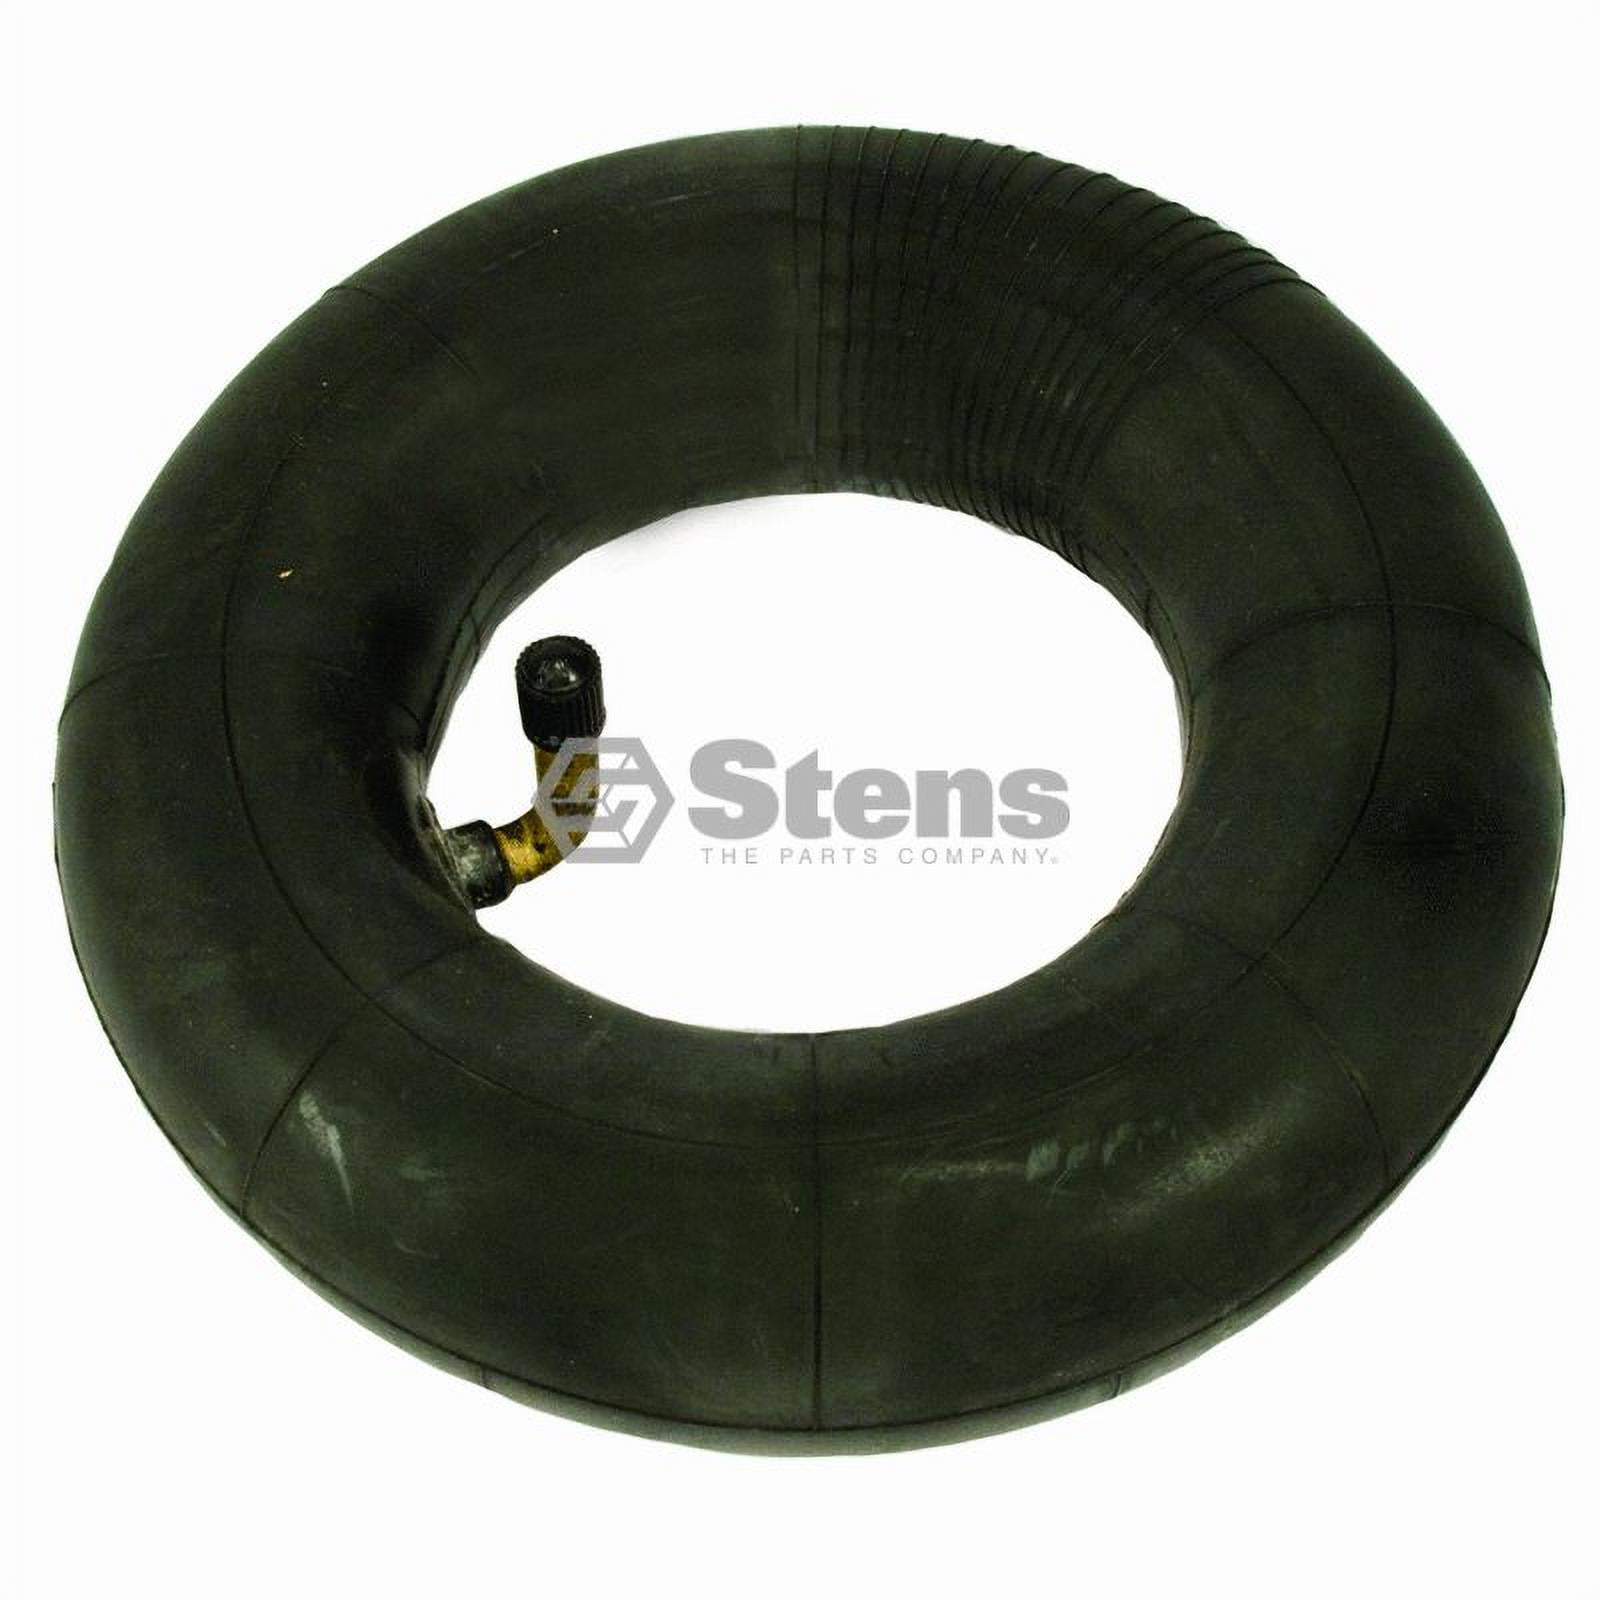 Popcornon 10X2.70-6.5 Inner Tube Outer Tire 10X2.70-6.5 Inflation Tyre for Electric Scooter Balance Scooter Accessories